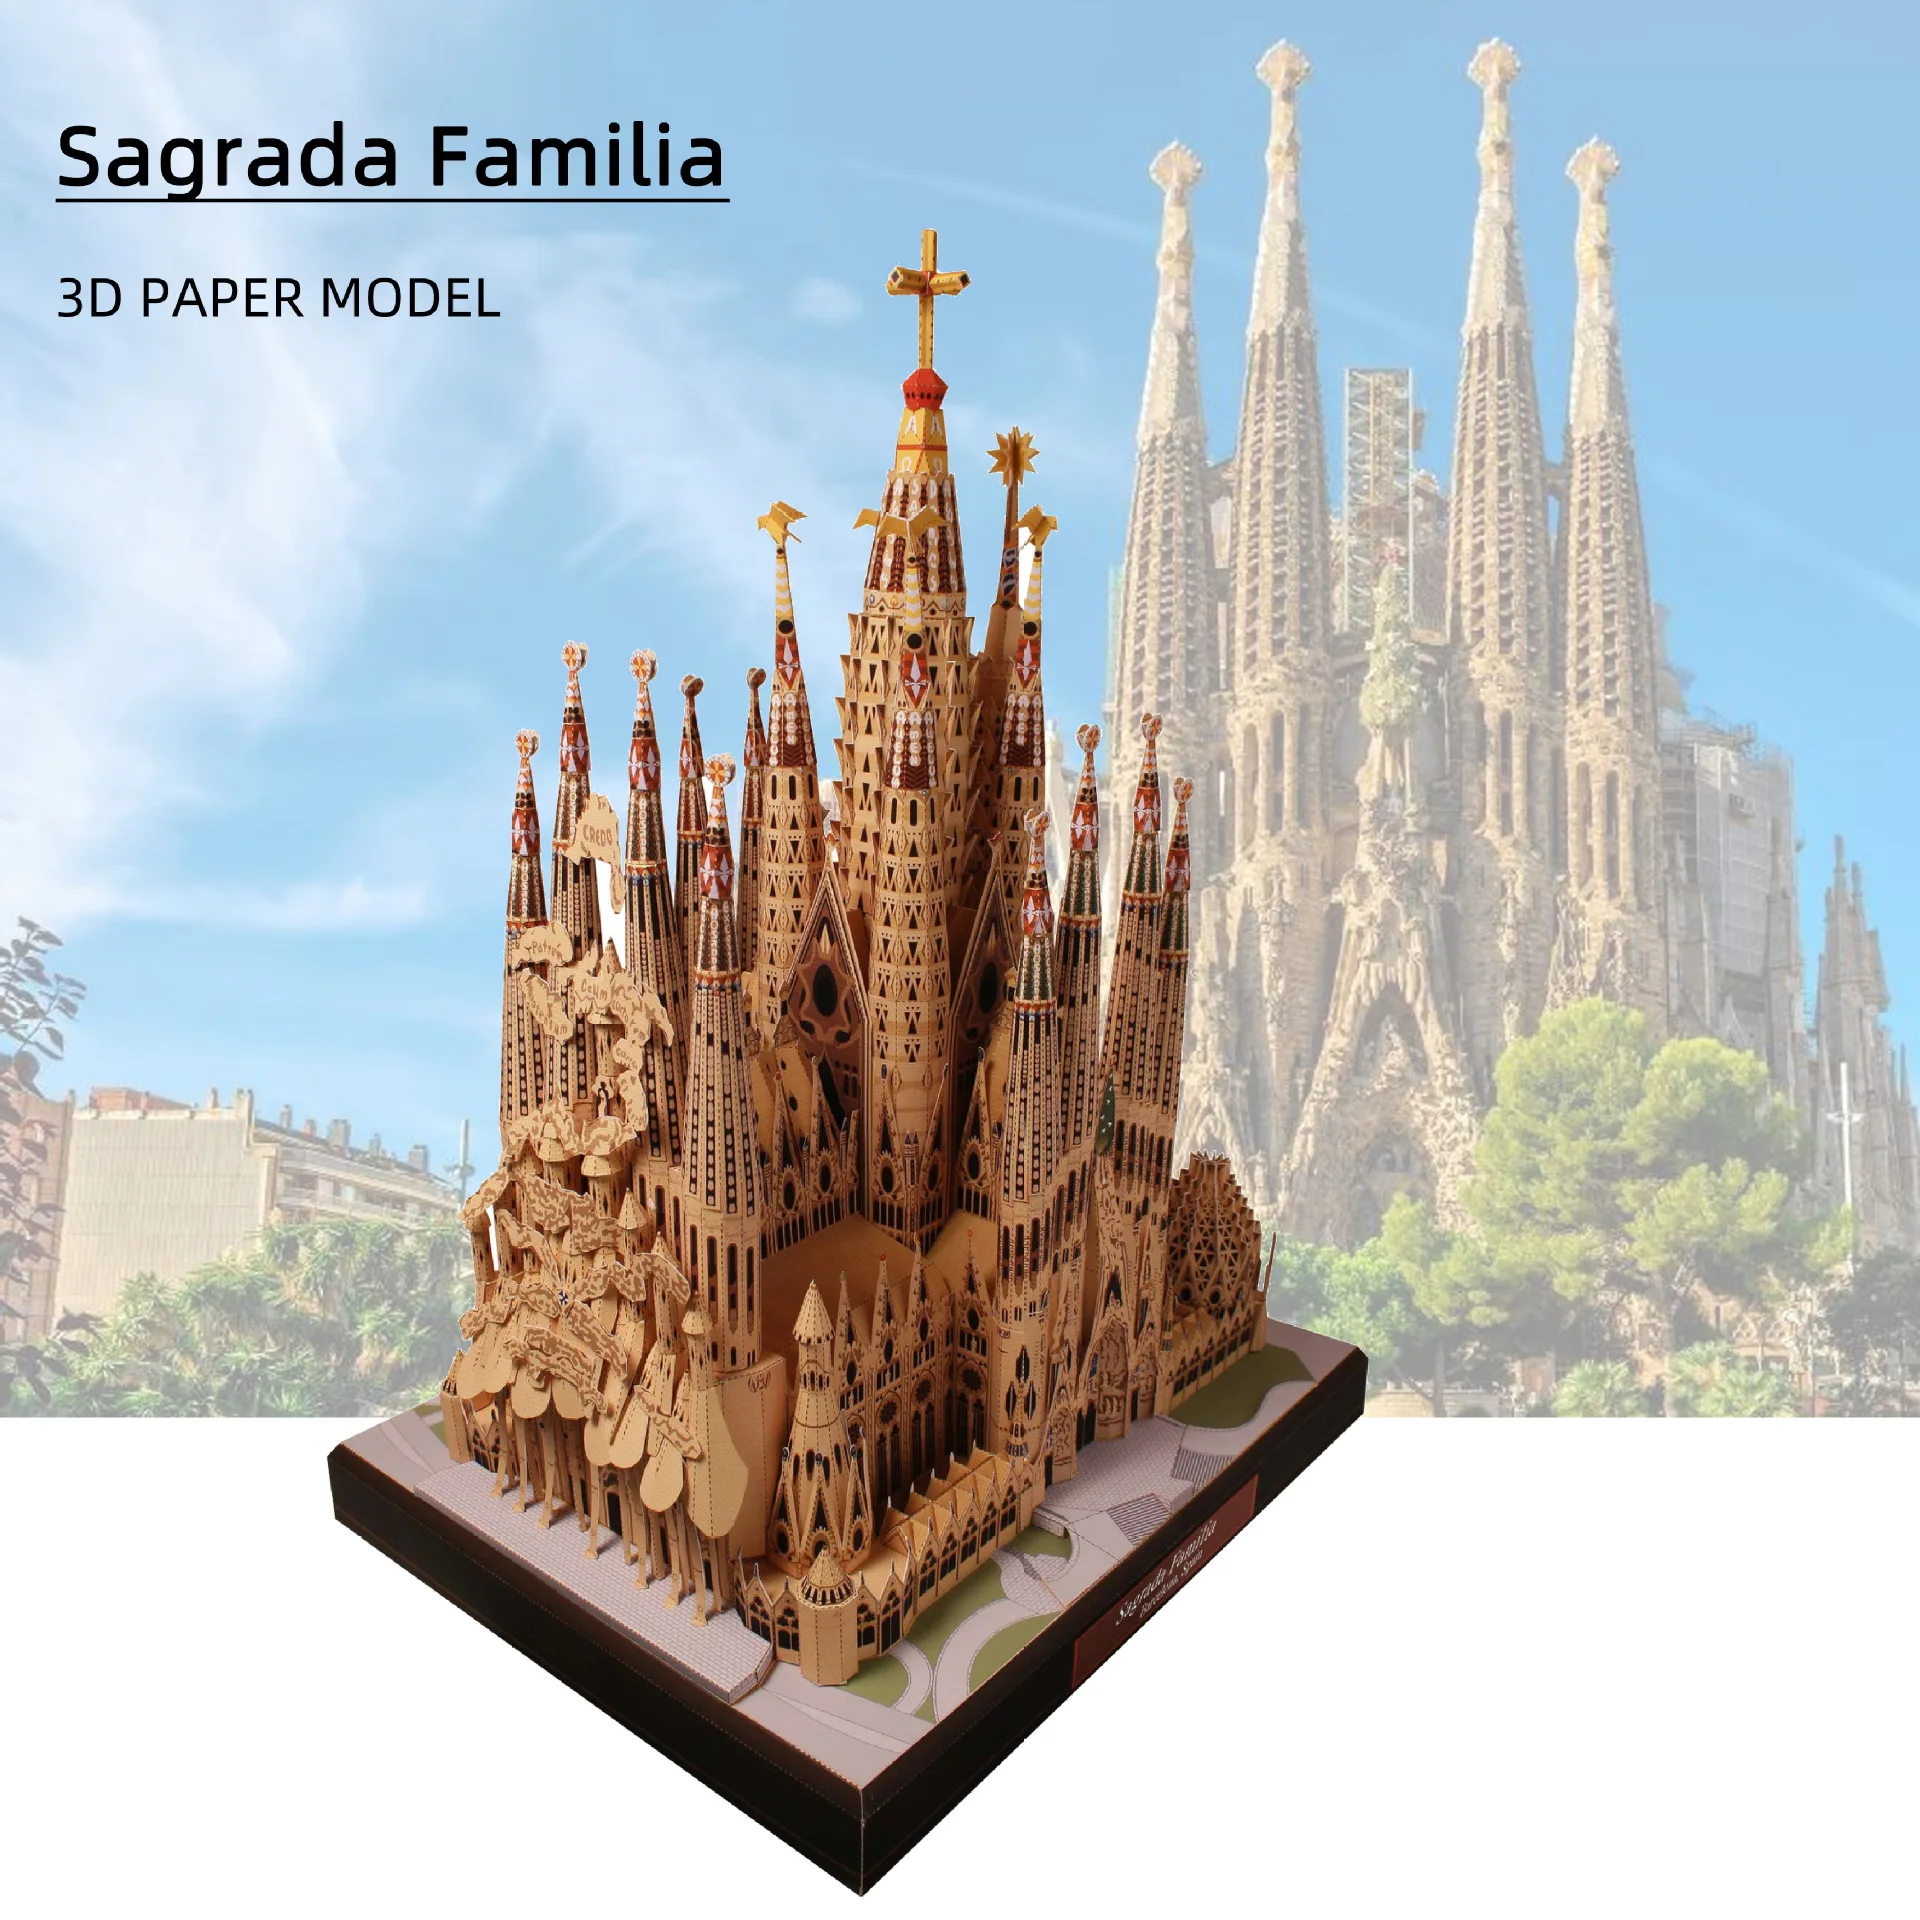 

World Famous Buildings Spain Cathedral Sagrada Familia Handcraft DIY Card Paper Model Kit Handmade Toy Puzzles Papercrafts